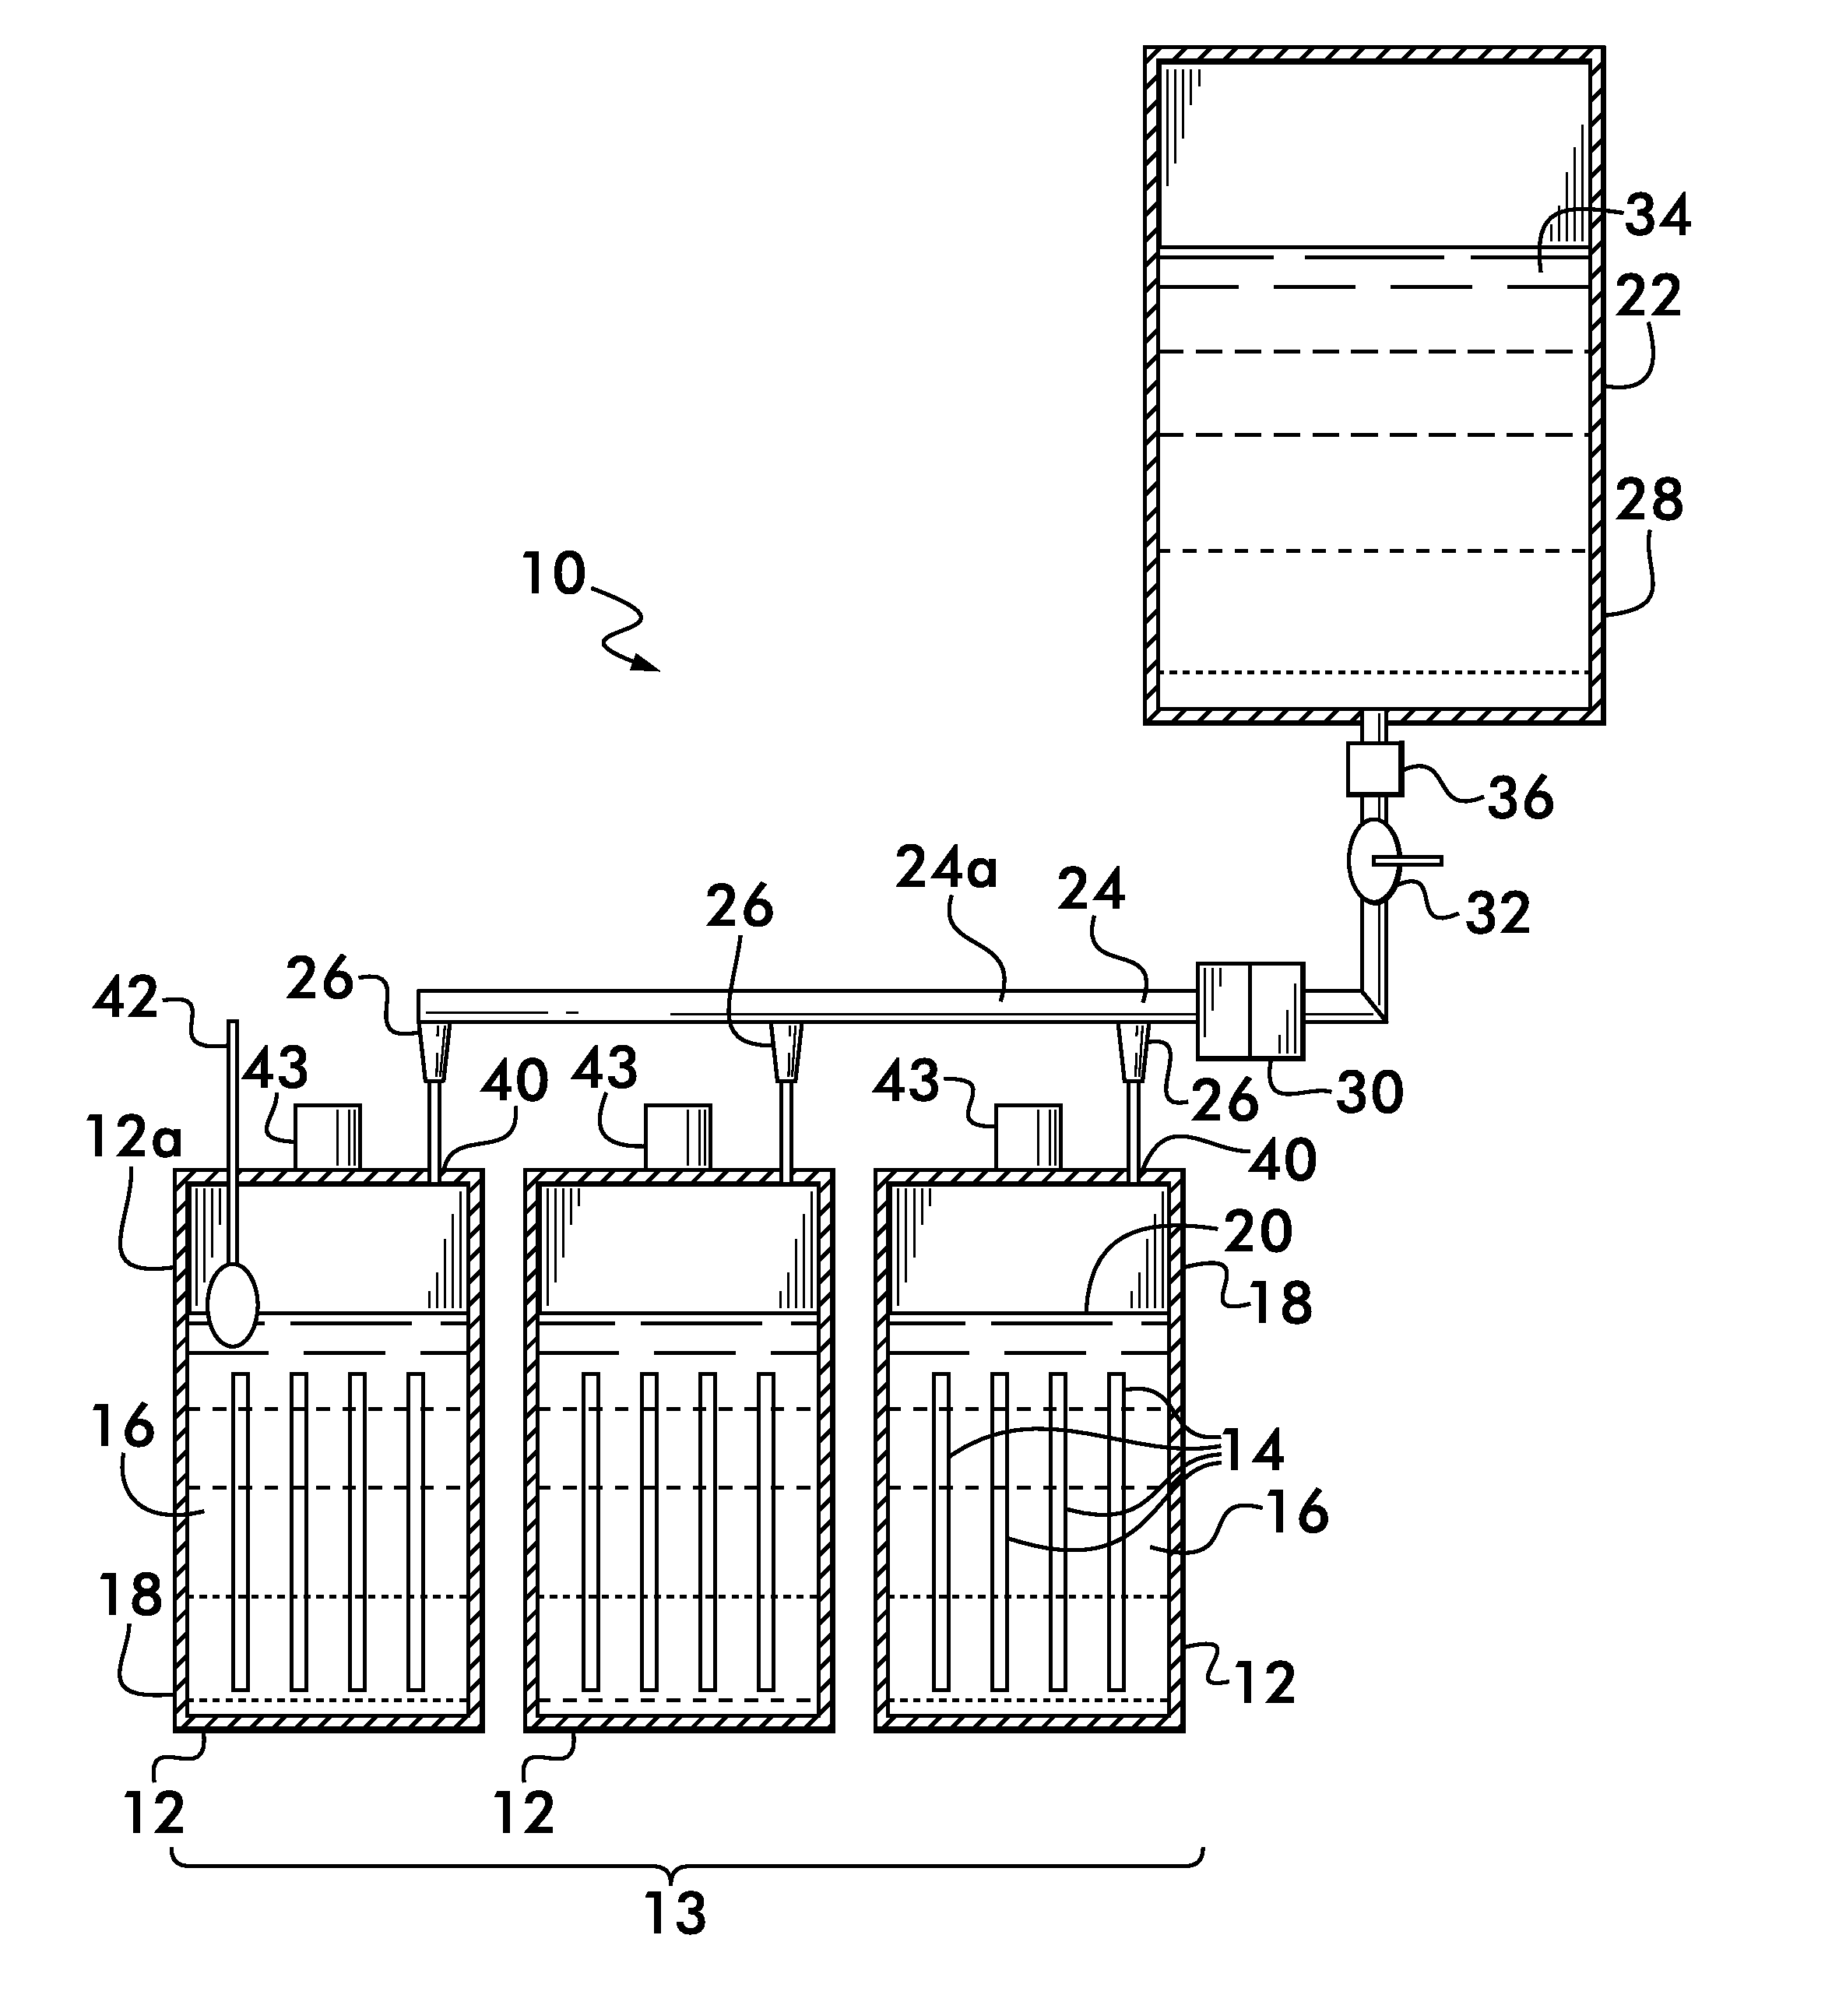 Battery watering system